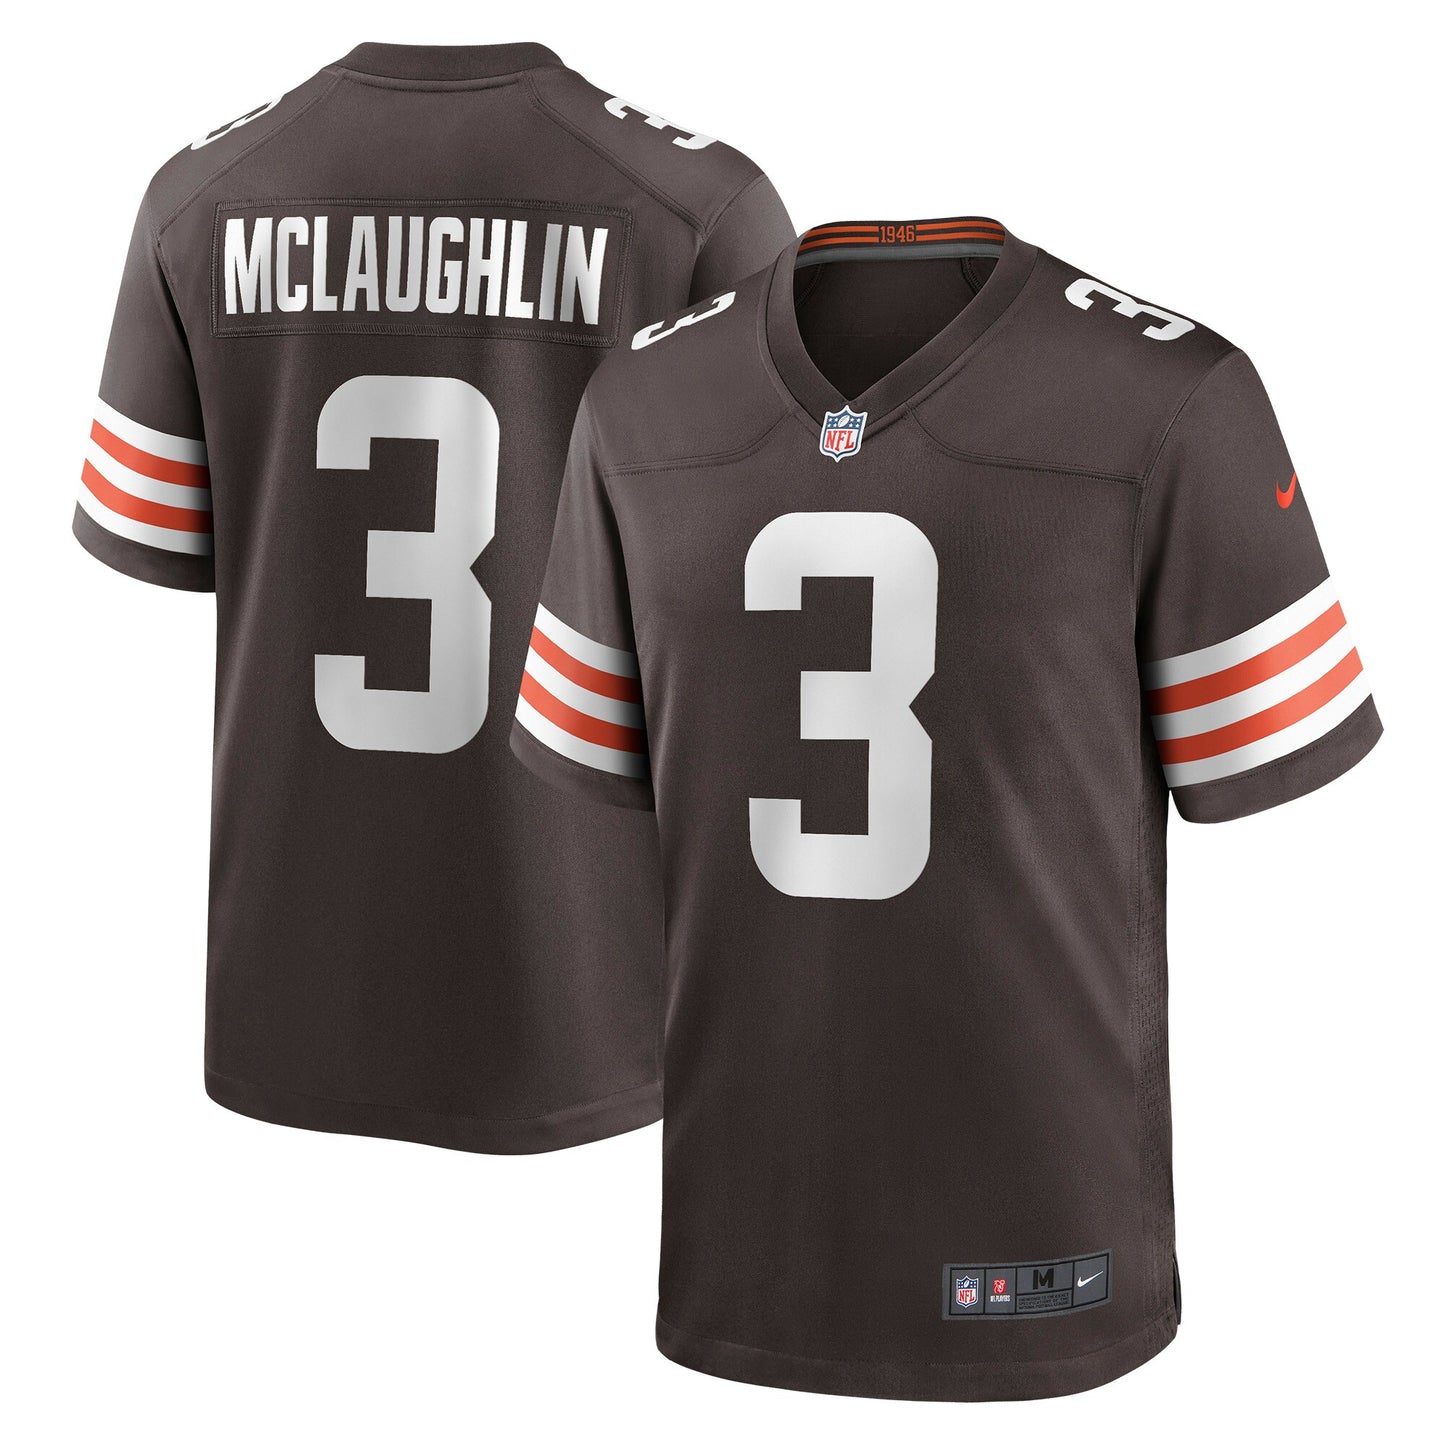 Chase McLaughlin Cleveland Browns Nike Game Jersey - Brown